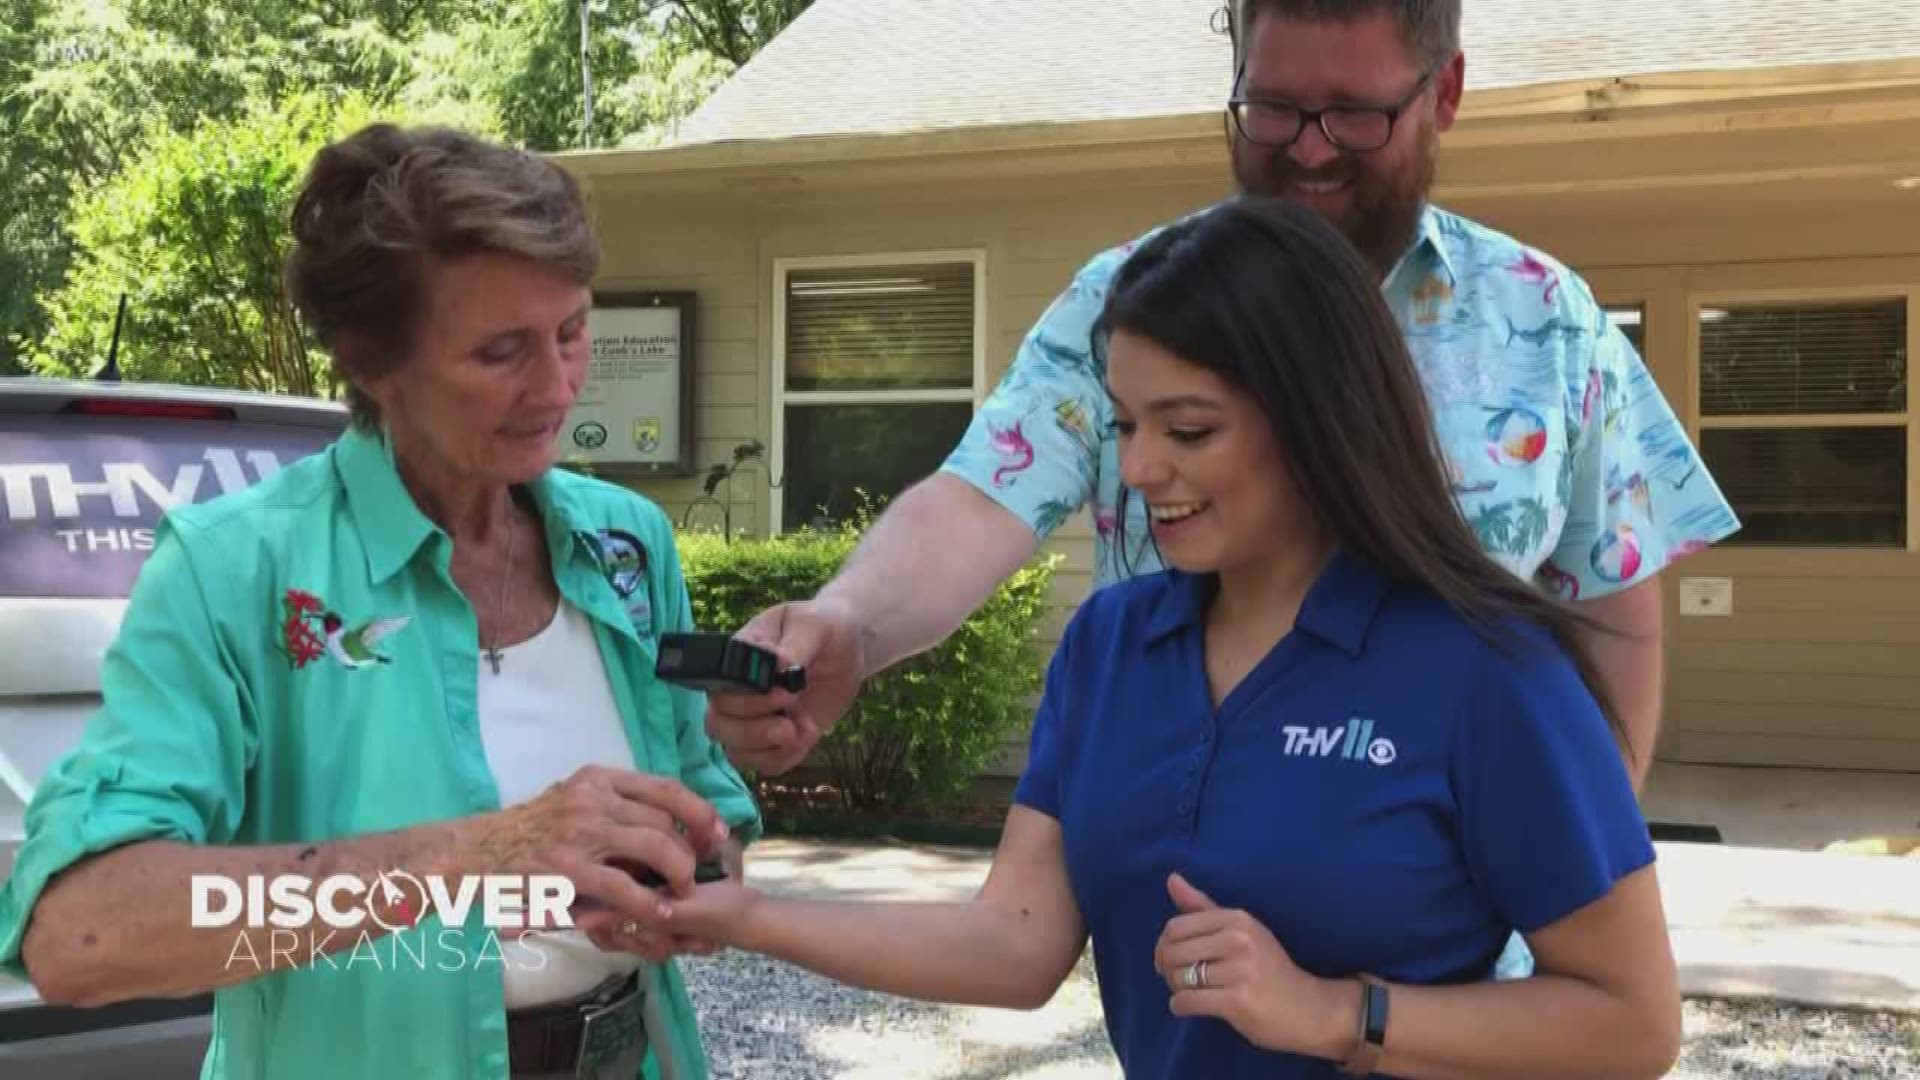 Each year, hummingbirds migrate to the gulf coast for winter. Lucky for us, the birds stop in Arkansas every spring - on their way back north. In this week's Discover Arkansas, Adam Bledsoe and Mariel Ruiz visited a hummingbird haven where you can hold one in the palm of your hand.